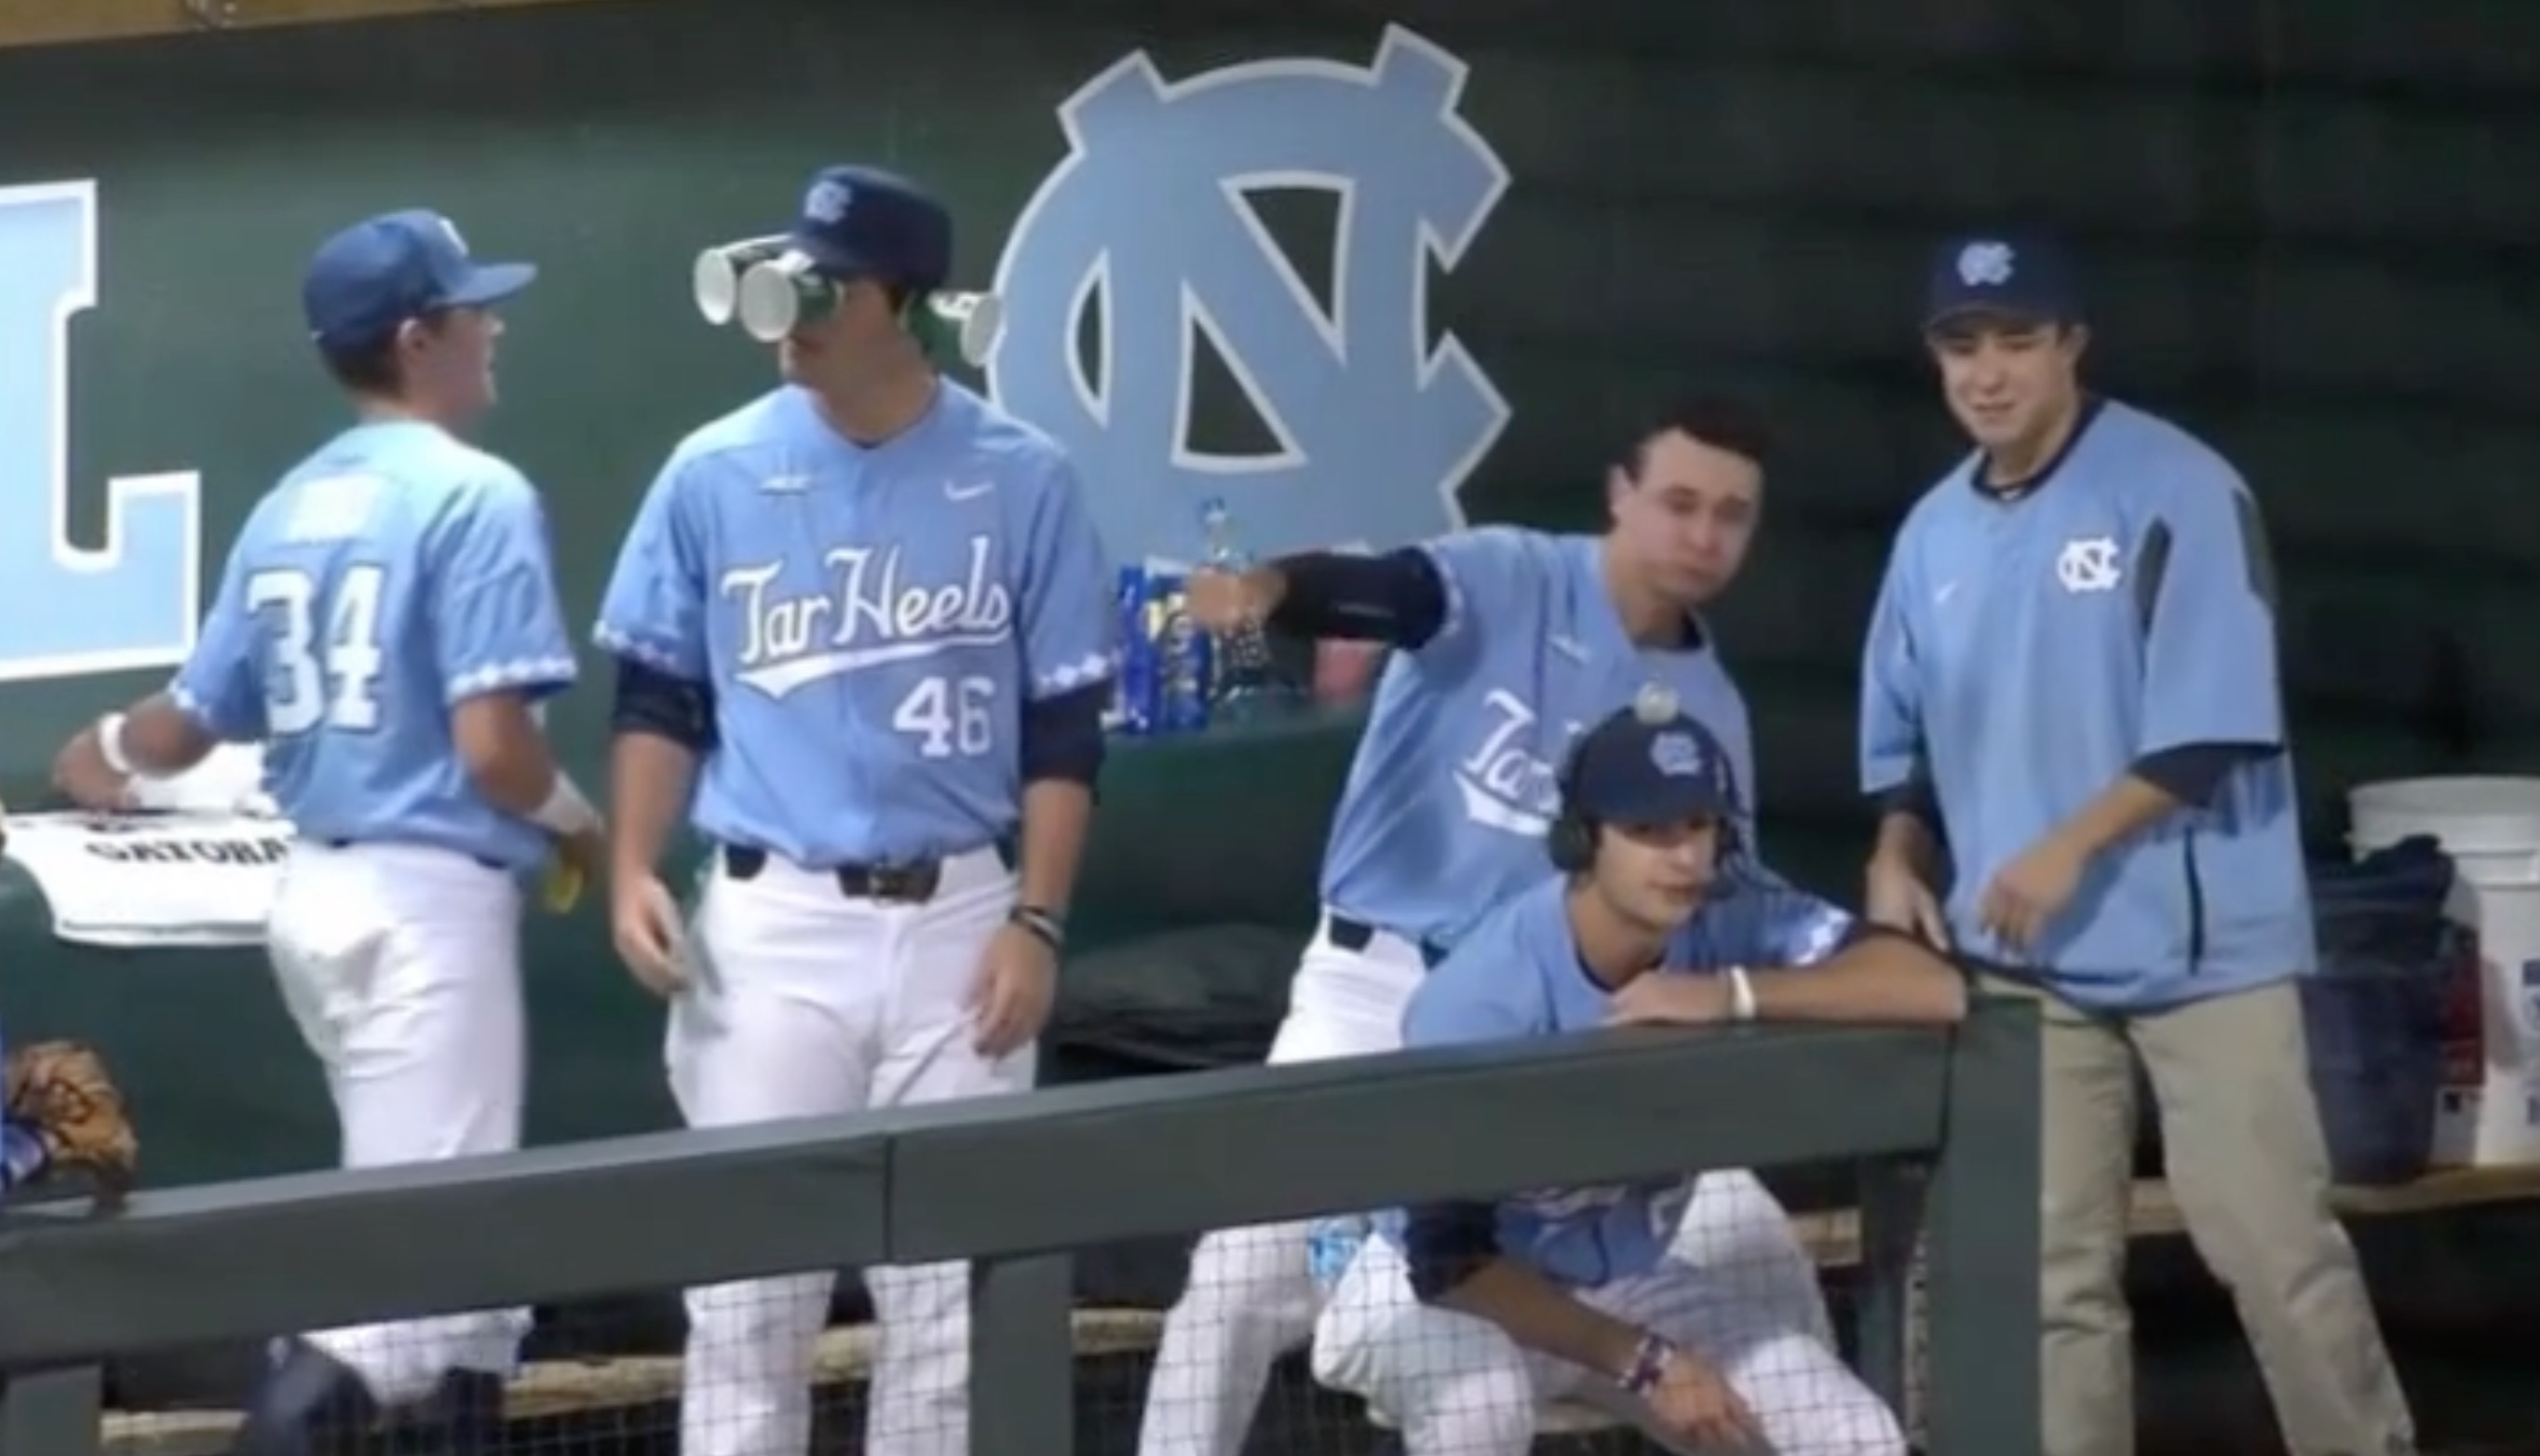 The UNC baseball team is taking videobombing to soaring new